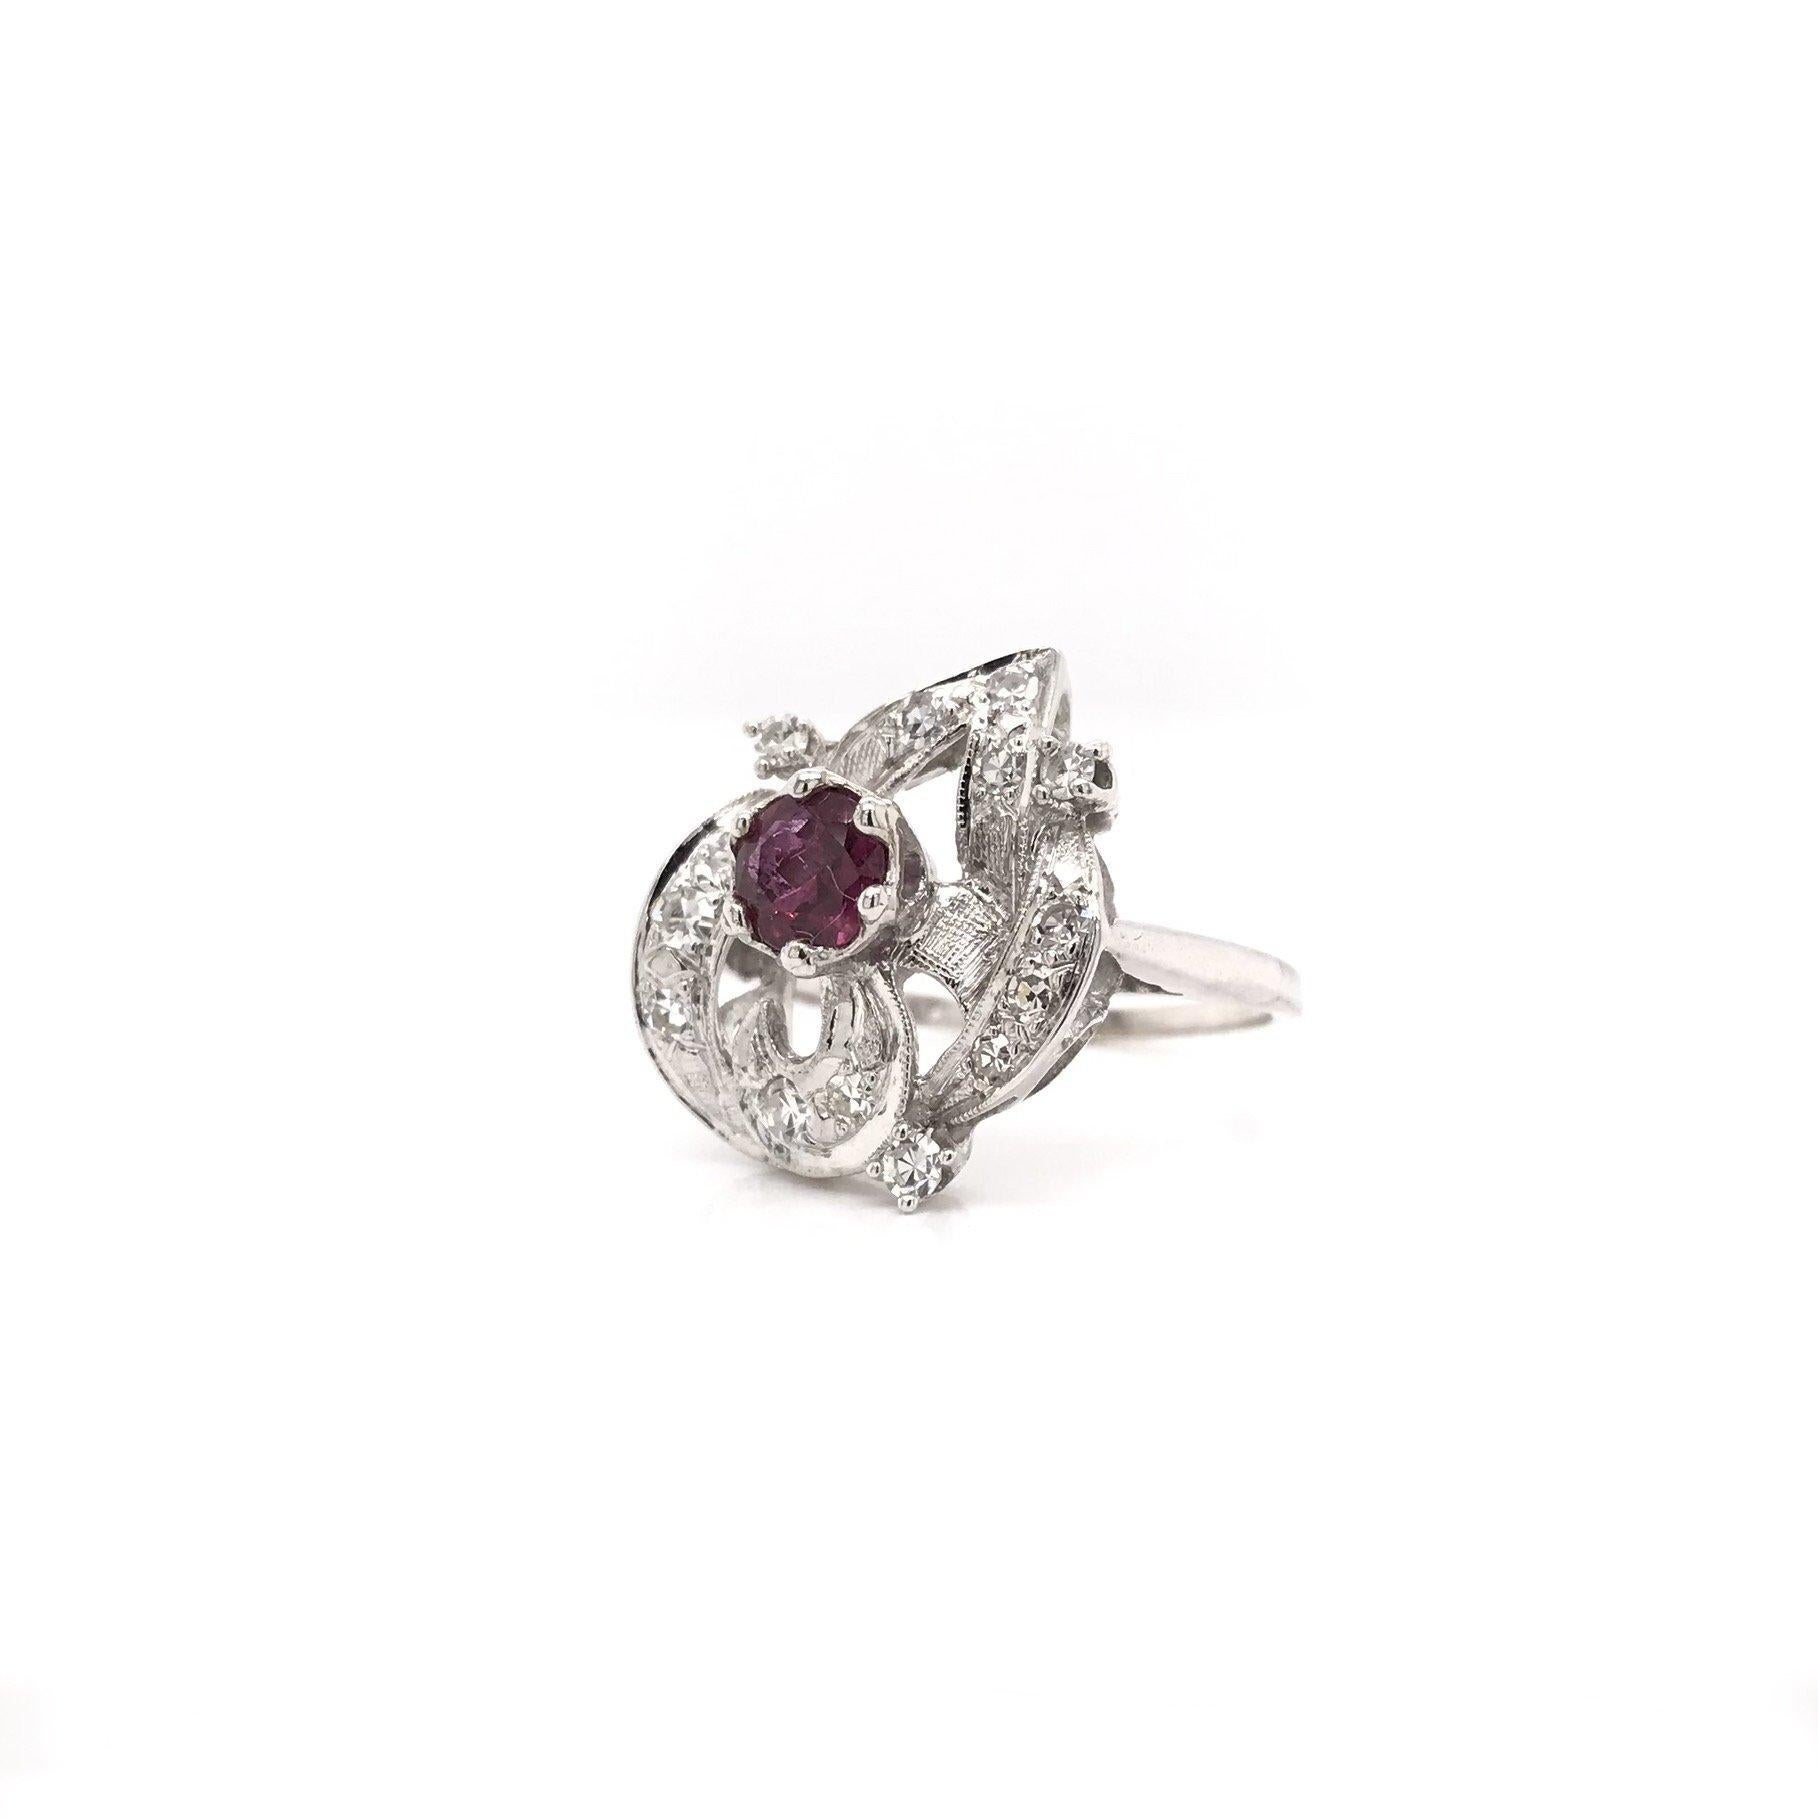 This ruby and diamond ring was crafted sometime during the Retro design era ( 1940-1960 ) and it shows! During this grand era of jewelry design you see a lot of diamonds, rubies, and unique cluster arrangements utilized. This bold cocktail design is